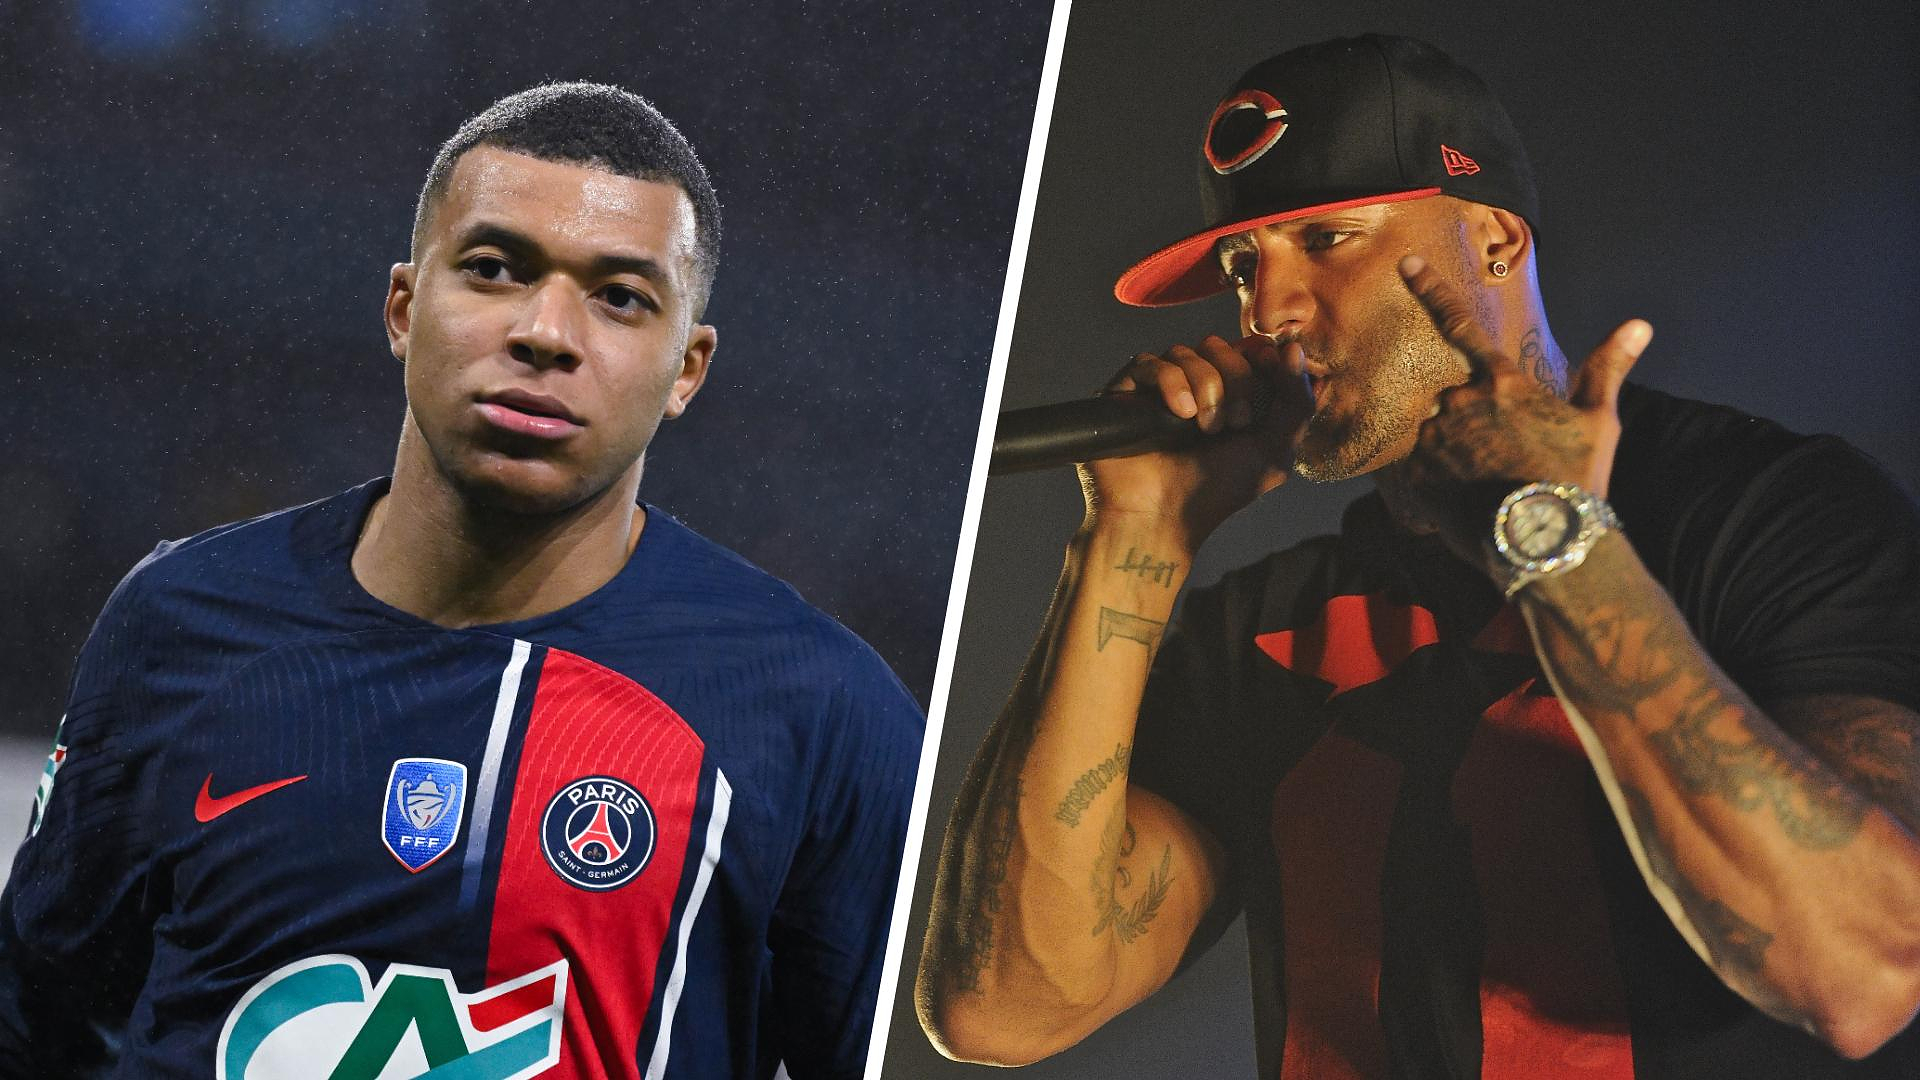 PSG: “tool of the system”, “overrated”, “you’re useless”, rapper Booba attacks Mbappé